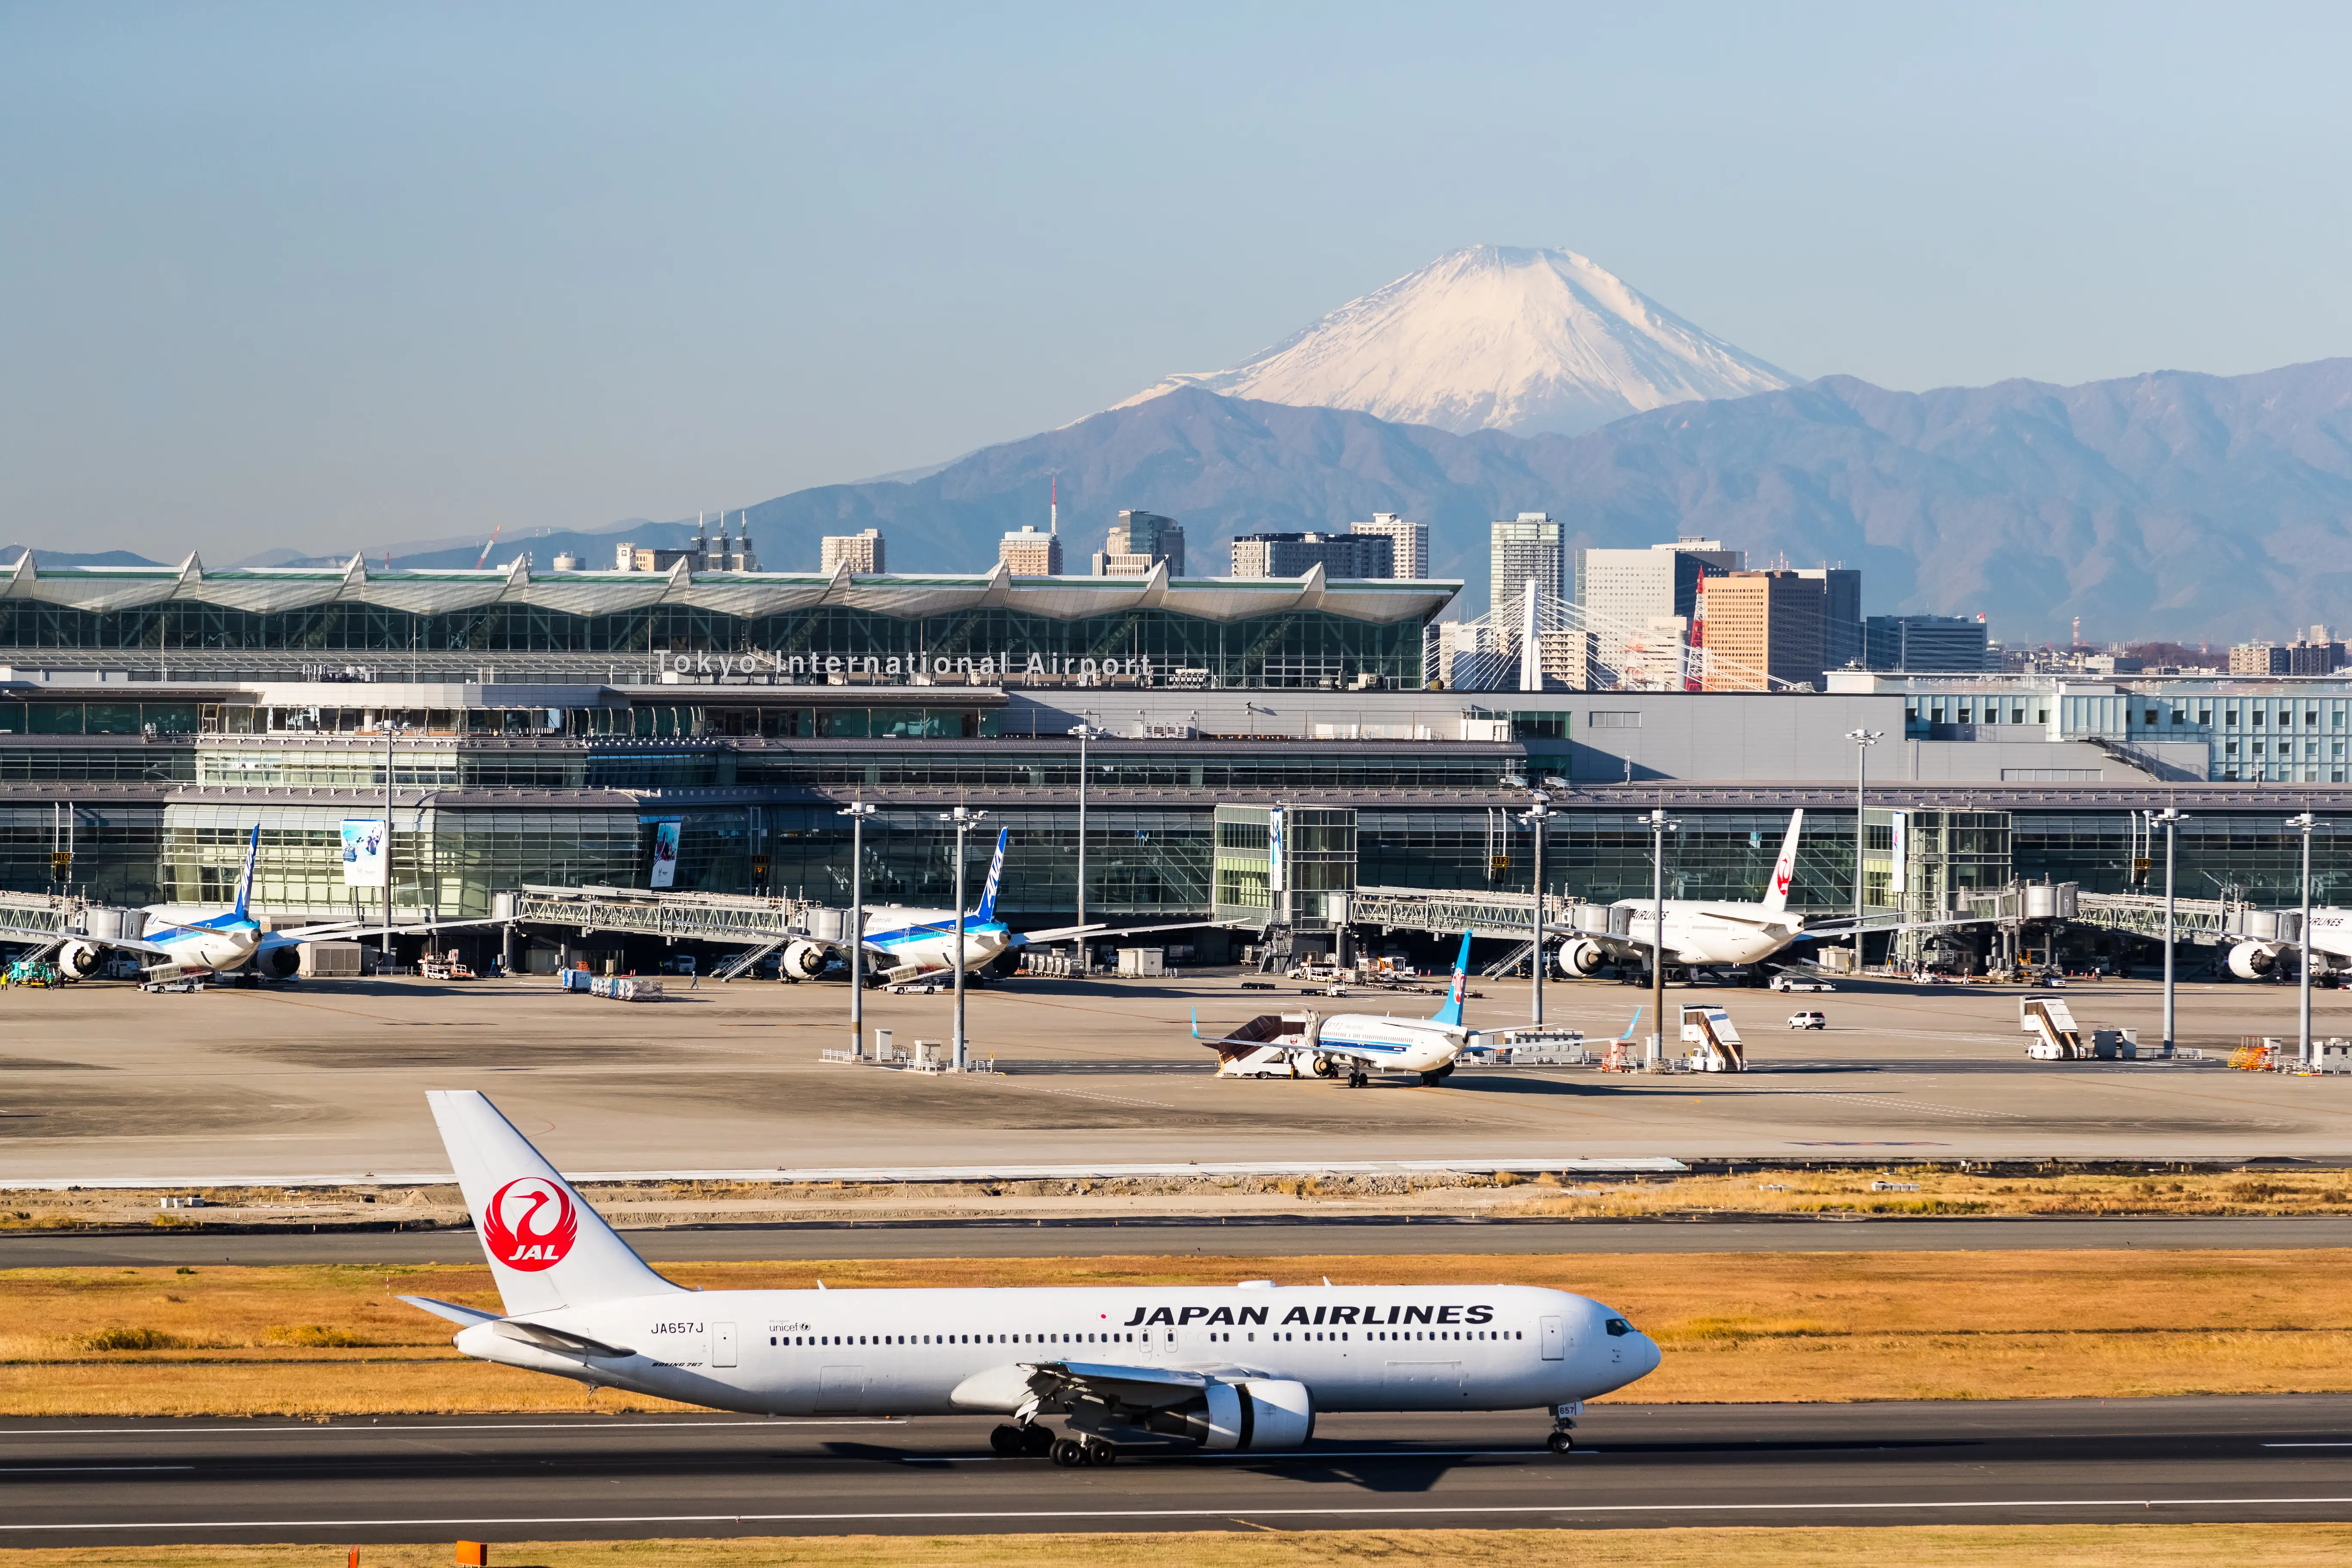 Haneda Airport and Mount Fuji on a clear day, Tokyo, Japan, December 14, 2017.